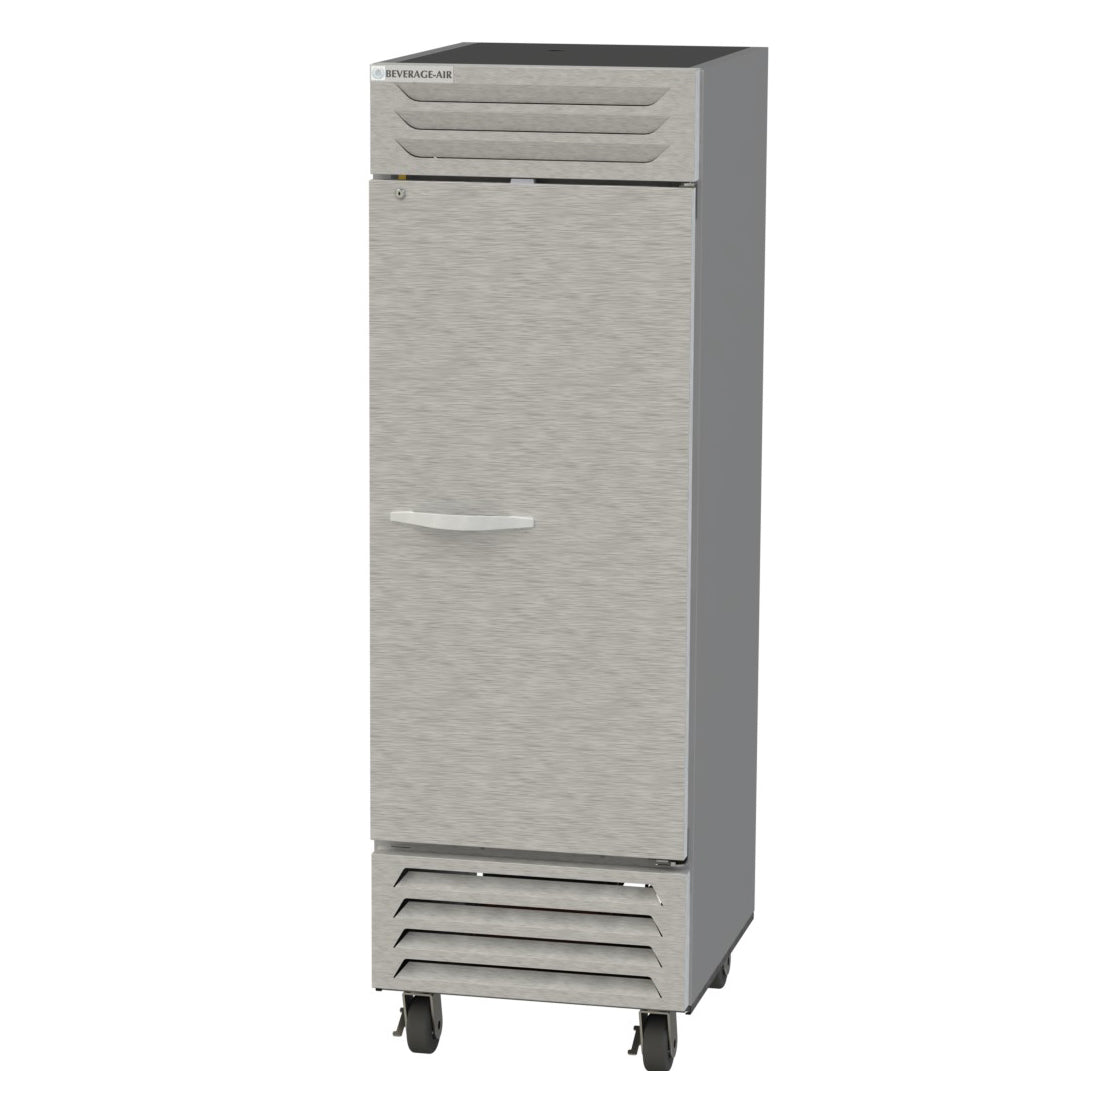 Beverage Air Vista Series FB23HC-1S Single Solid Door 27" Wide Stainless Steel Freezer - CONTACT US FOR BEST PRICING